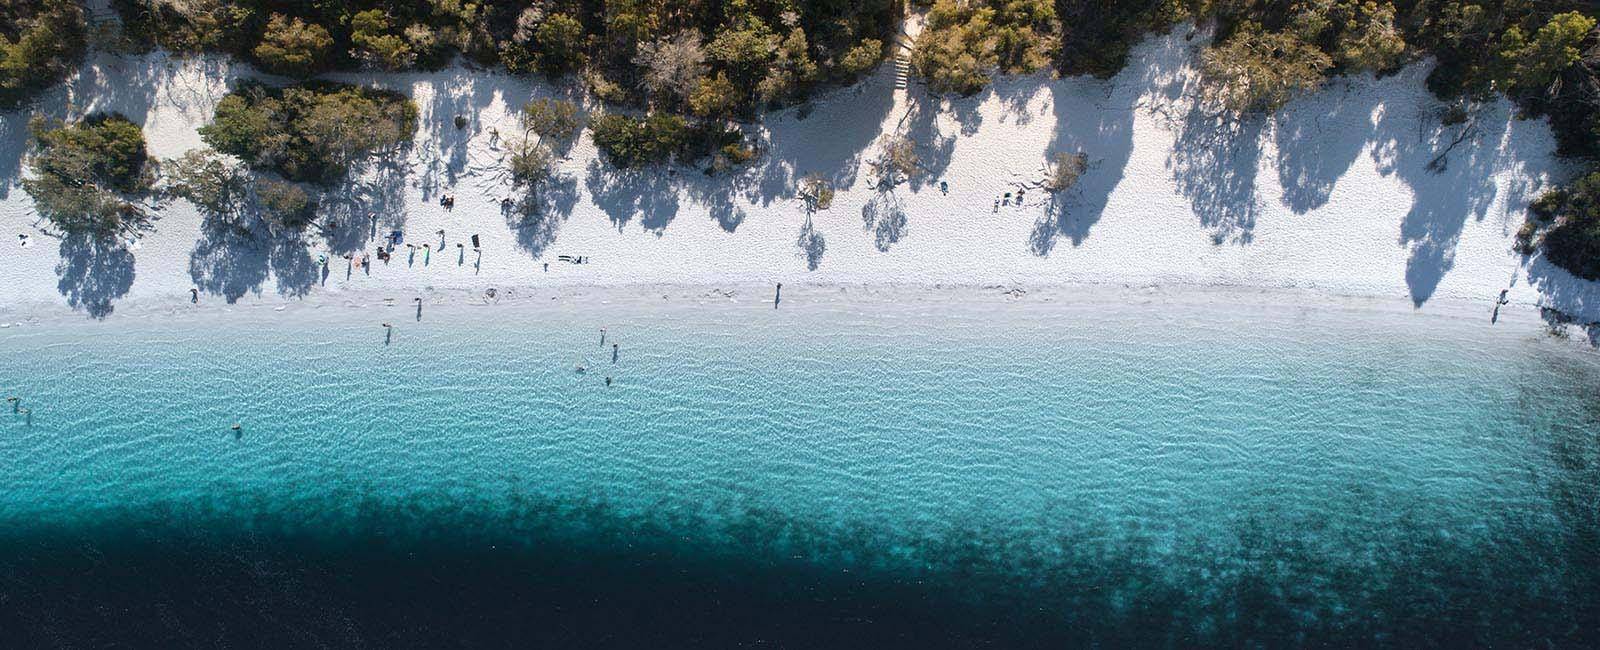 Lake McKenzie from above | 10 reasons to visit Fraser Island